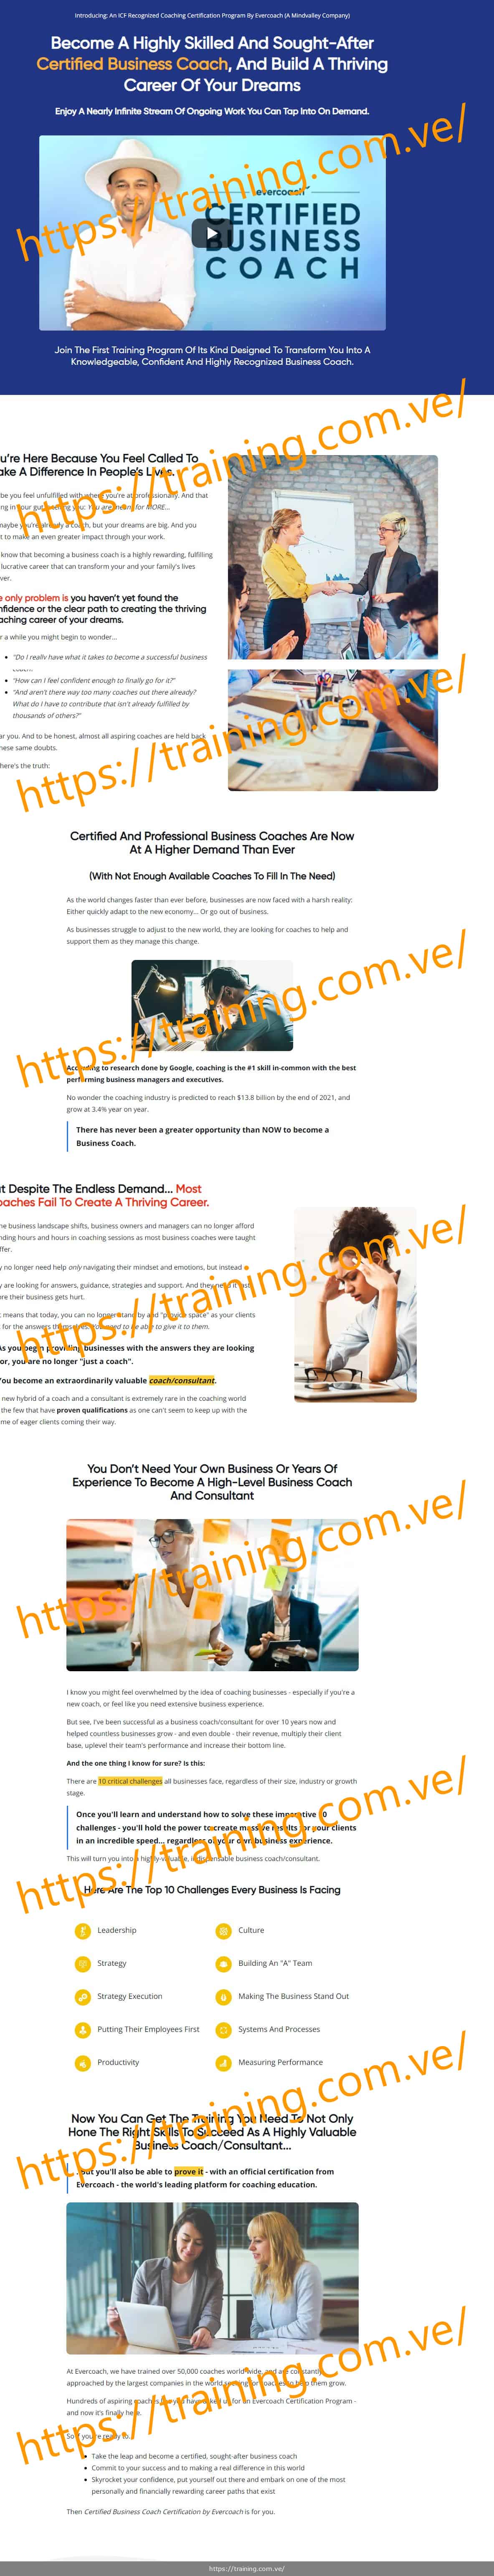 Certified Business Coach by Ajit Nawalkha Coupon Discount Free